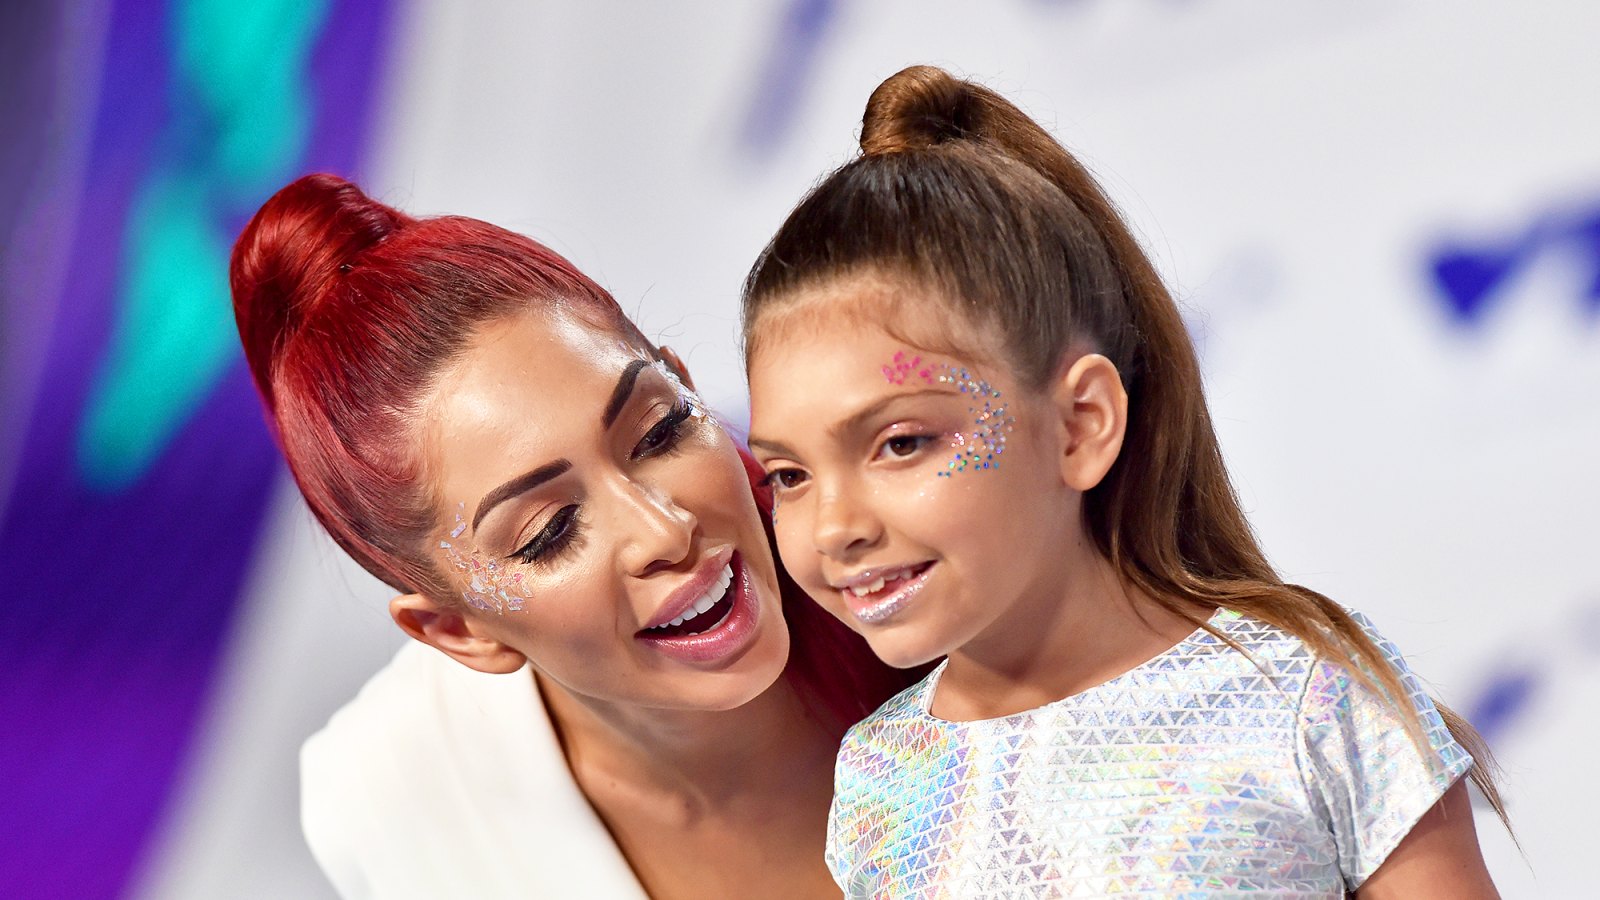 Farrah Abraham and daughter Sophia arrive at the 2017 MTV Video Music Awards at The Forum in Inglewood, California.